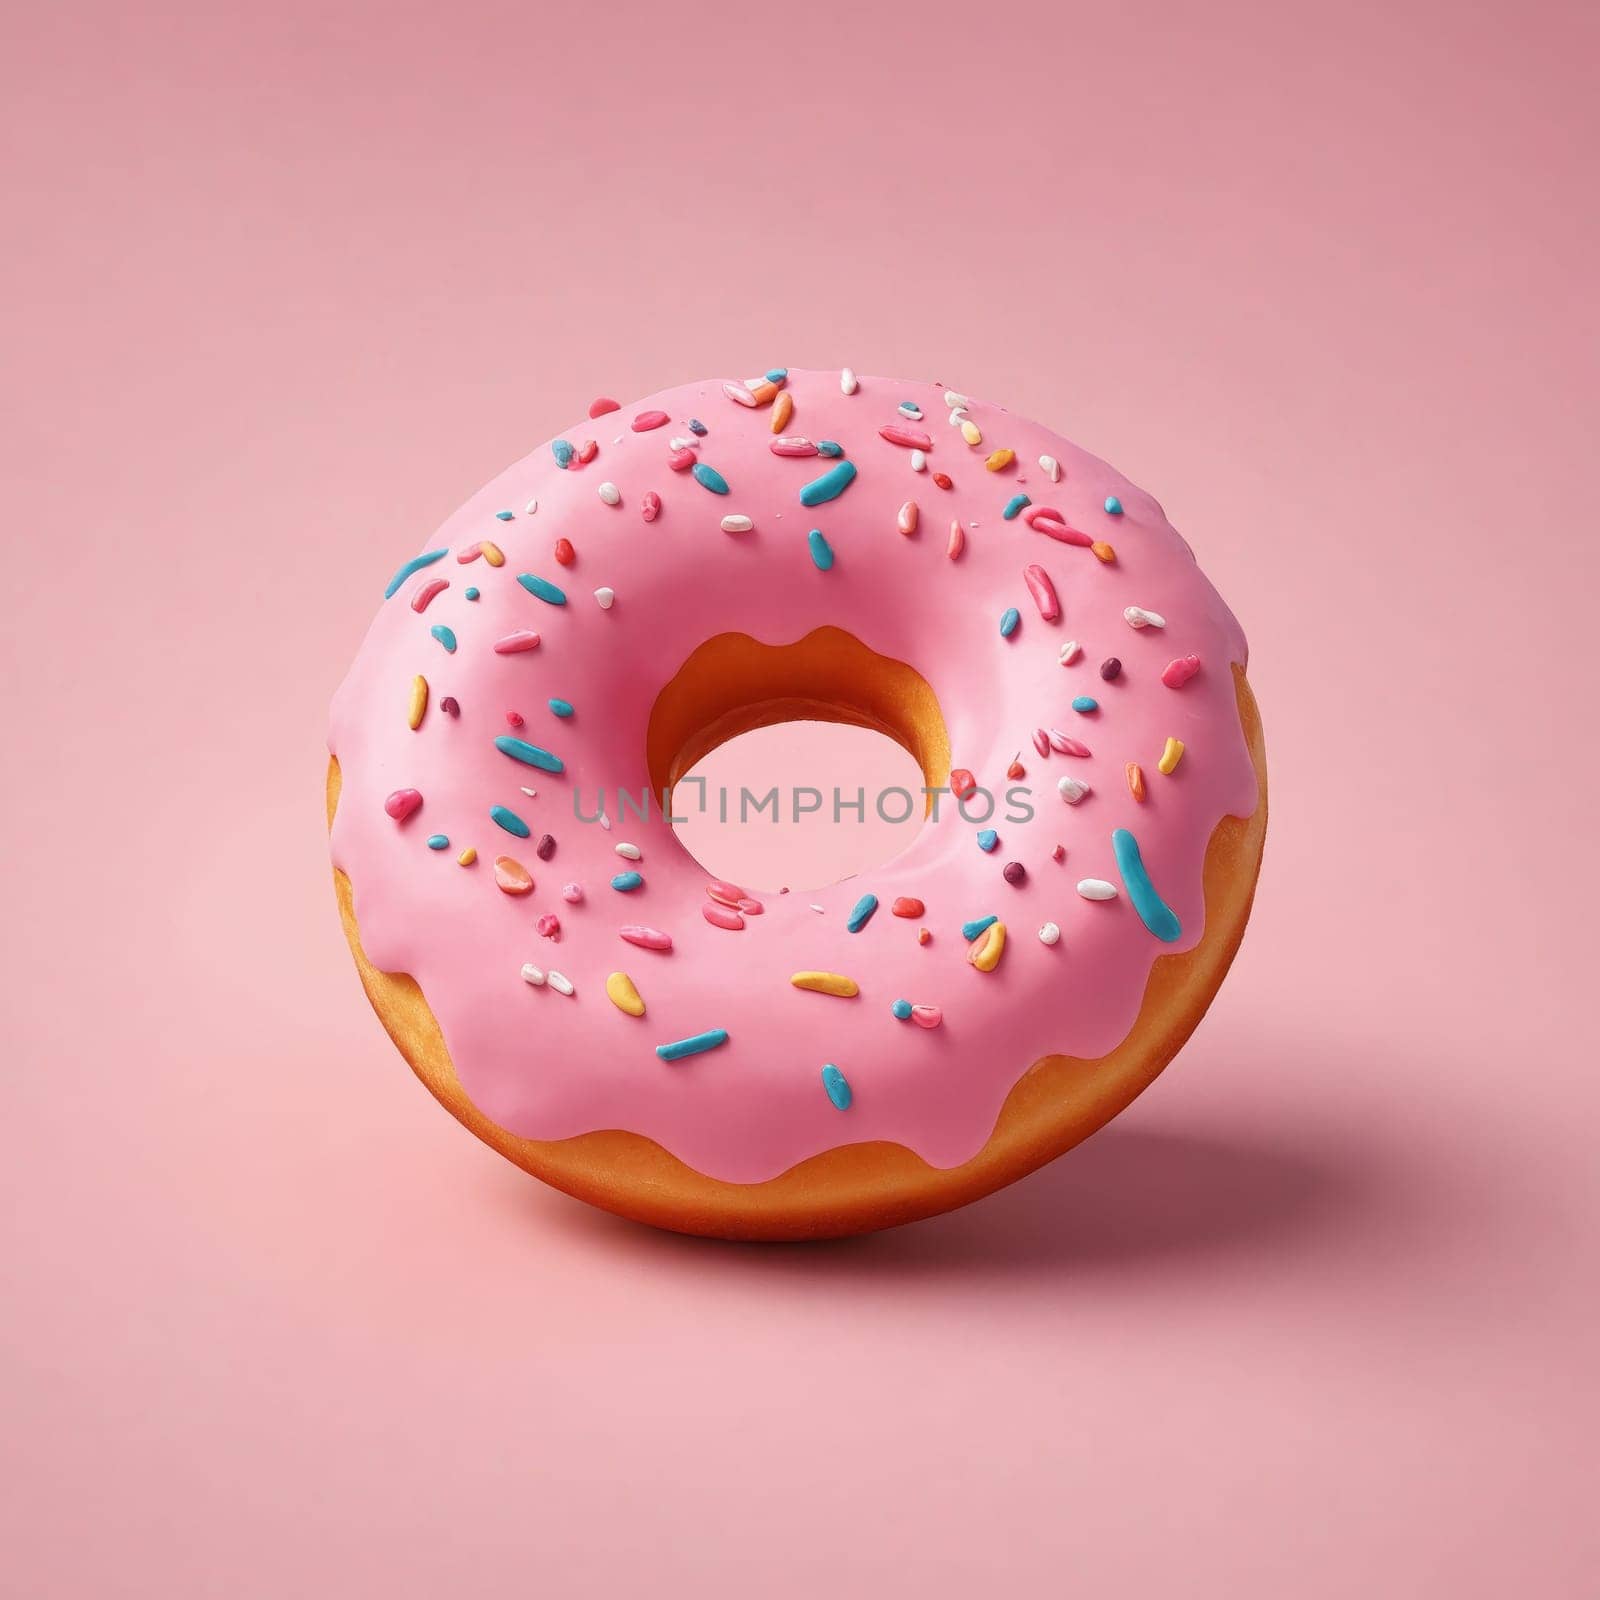 A delectable pink doughnut with pink frosting and sprinkles on a matching pink background. This finger food dessert is a delightful treat for any occasion